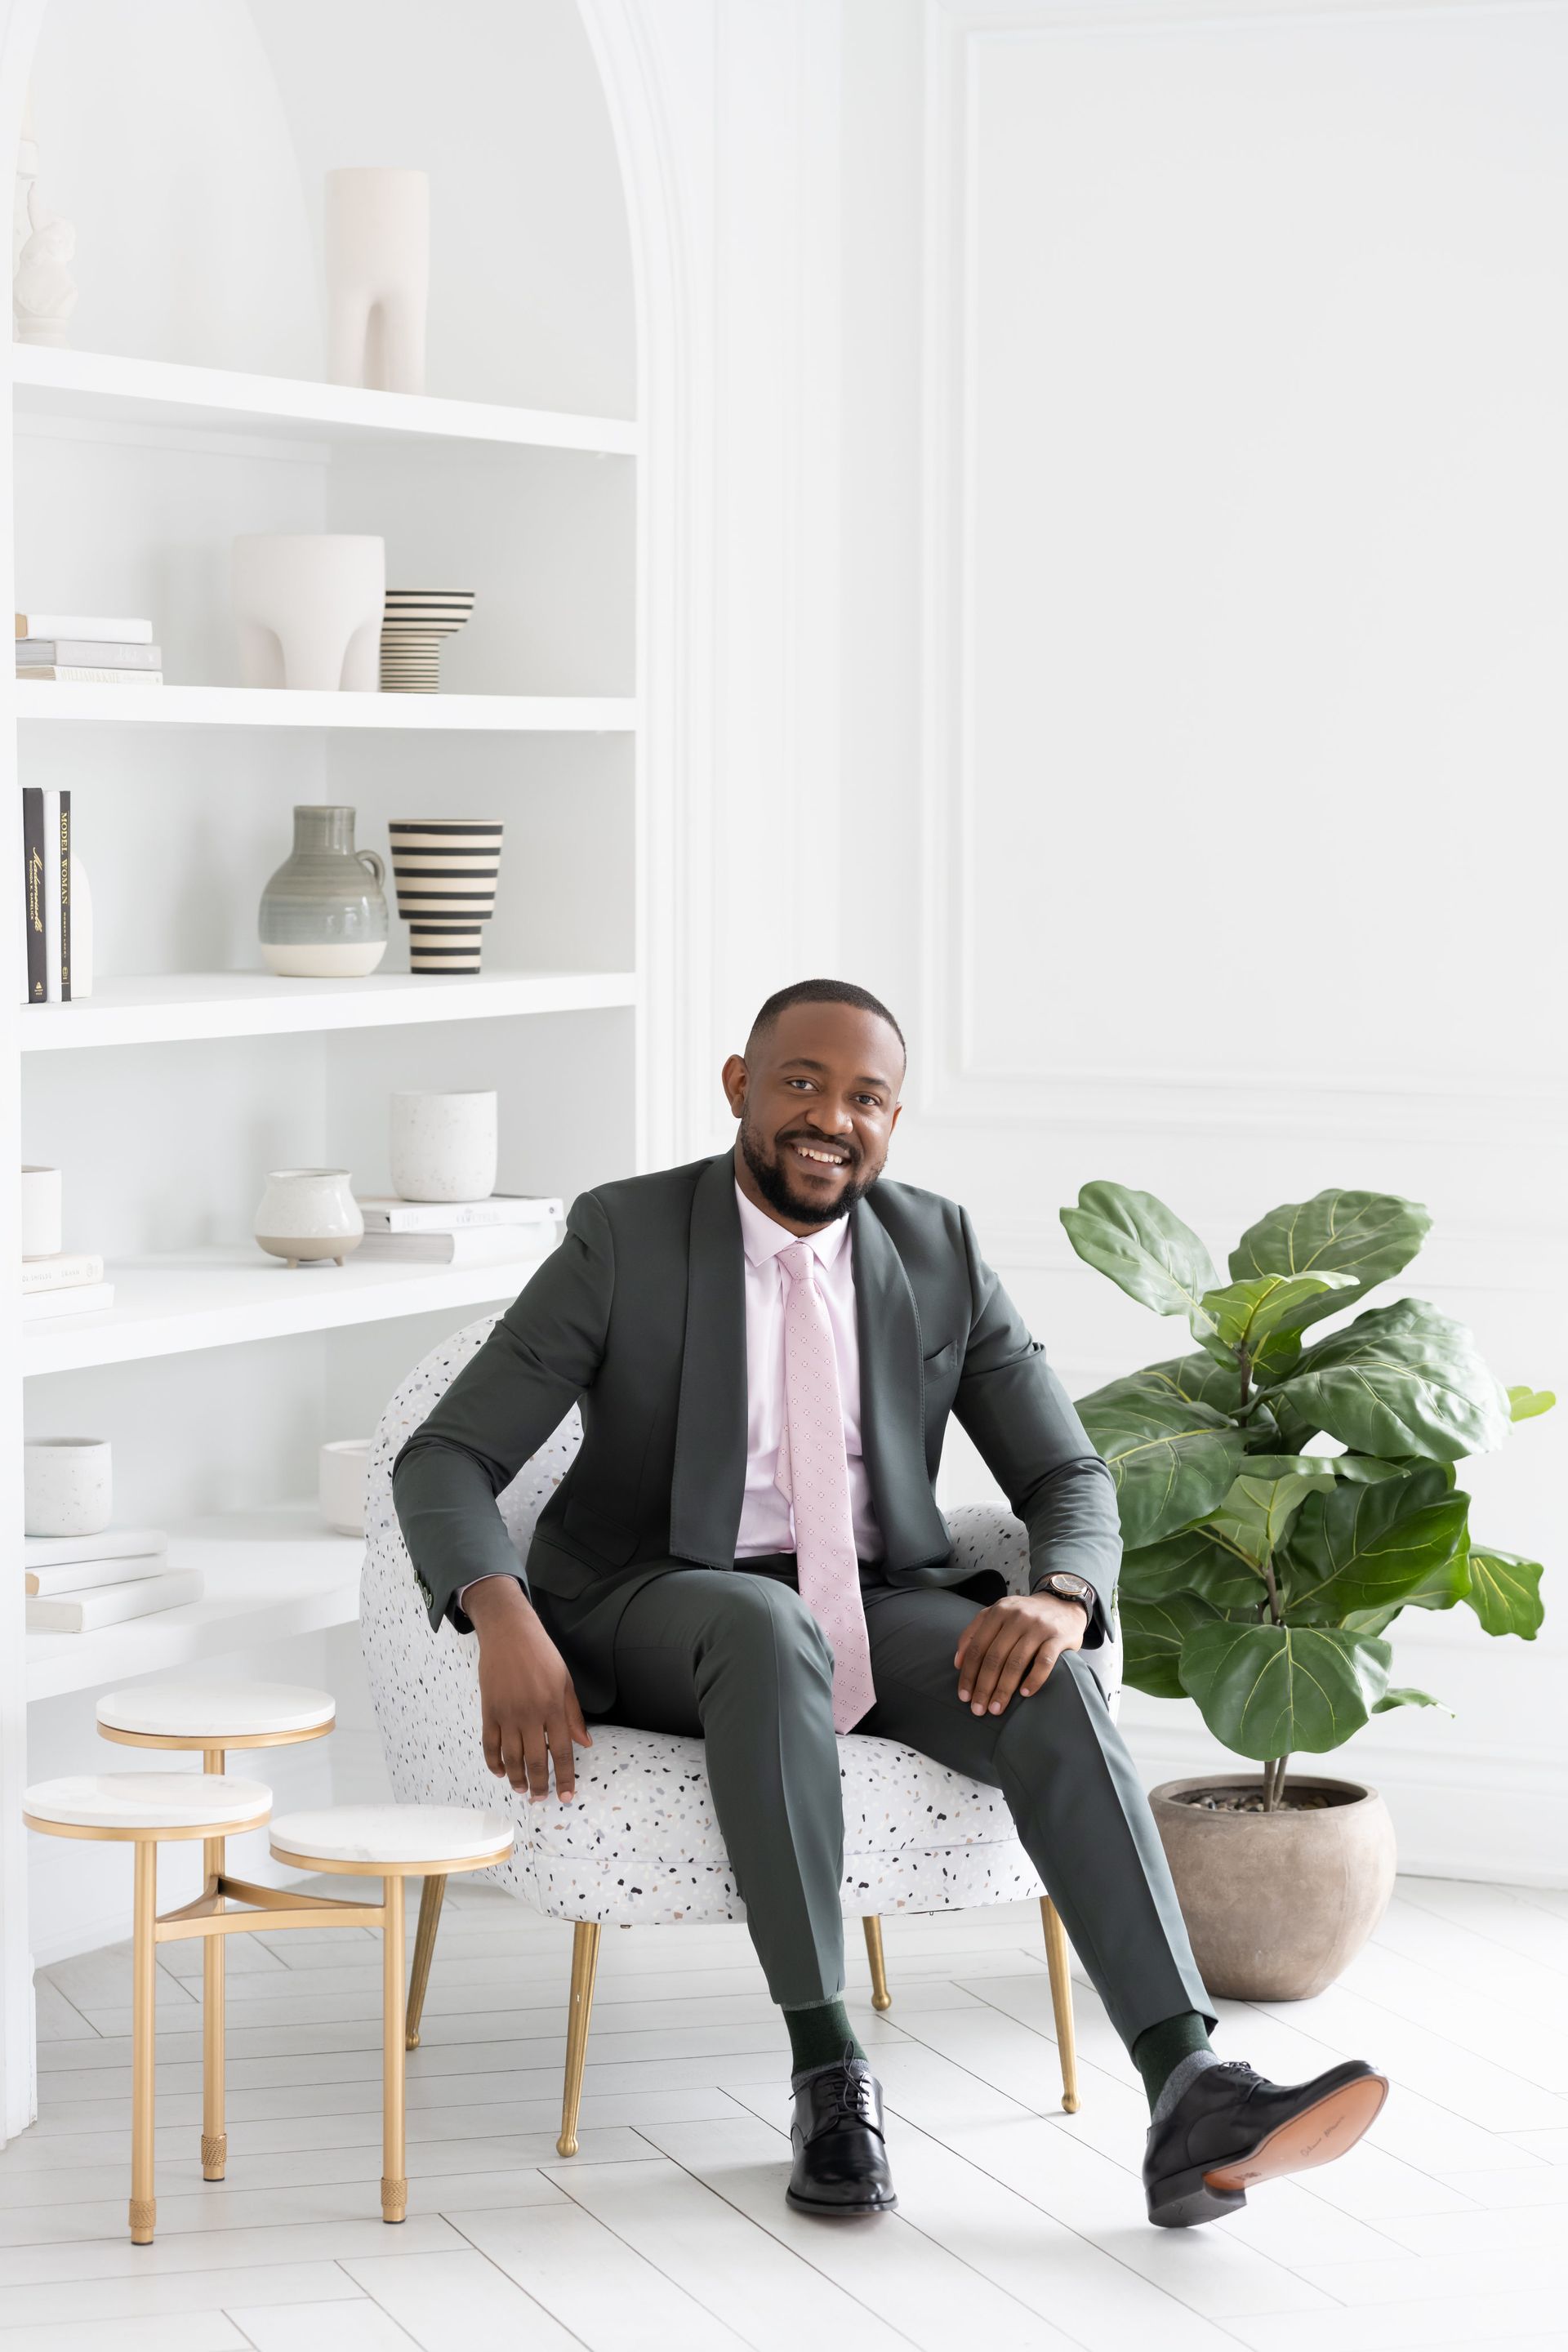 Engaging man in suit and tie seated in a white room with minimalistic décor including a plant and built-in cabinet. He offers a welcoming smile while leaning forward in his chair for his personal brand photography session